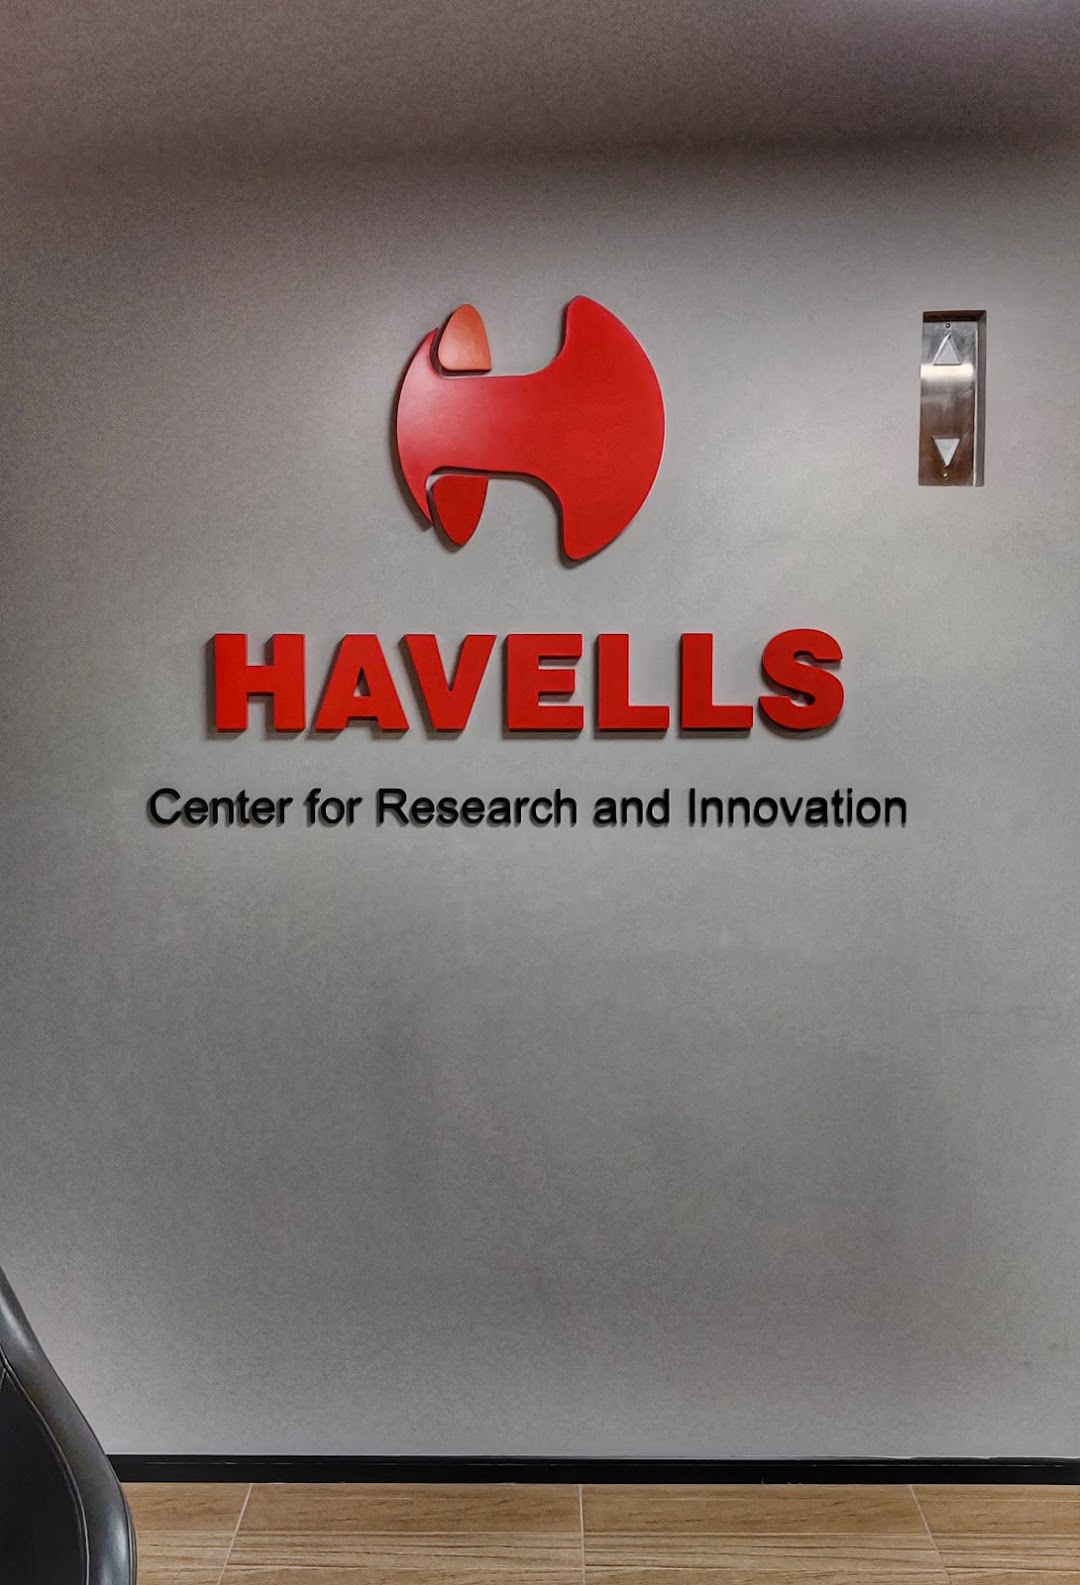 Havells Center for Research and Innovation